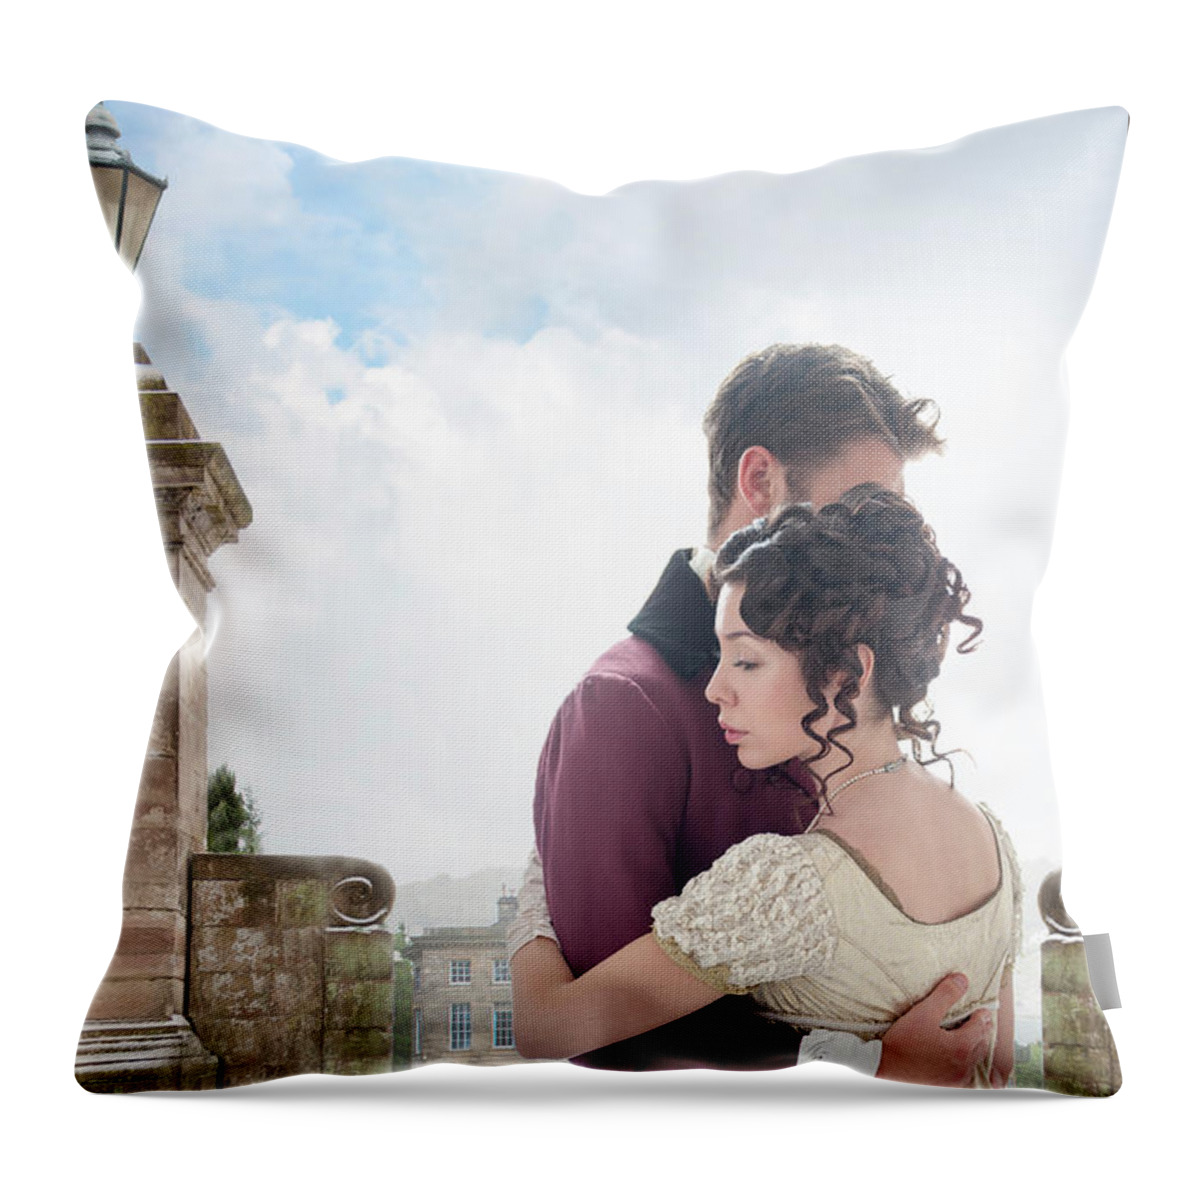 Regency Throw Pillow featuring the photograph Regency Couple Embracing by Lee Avison